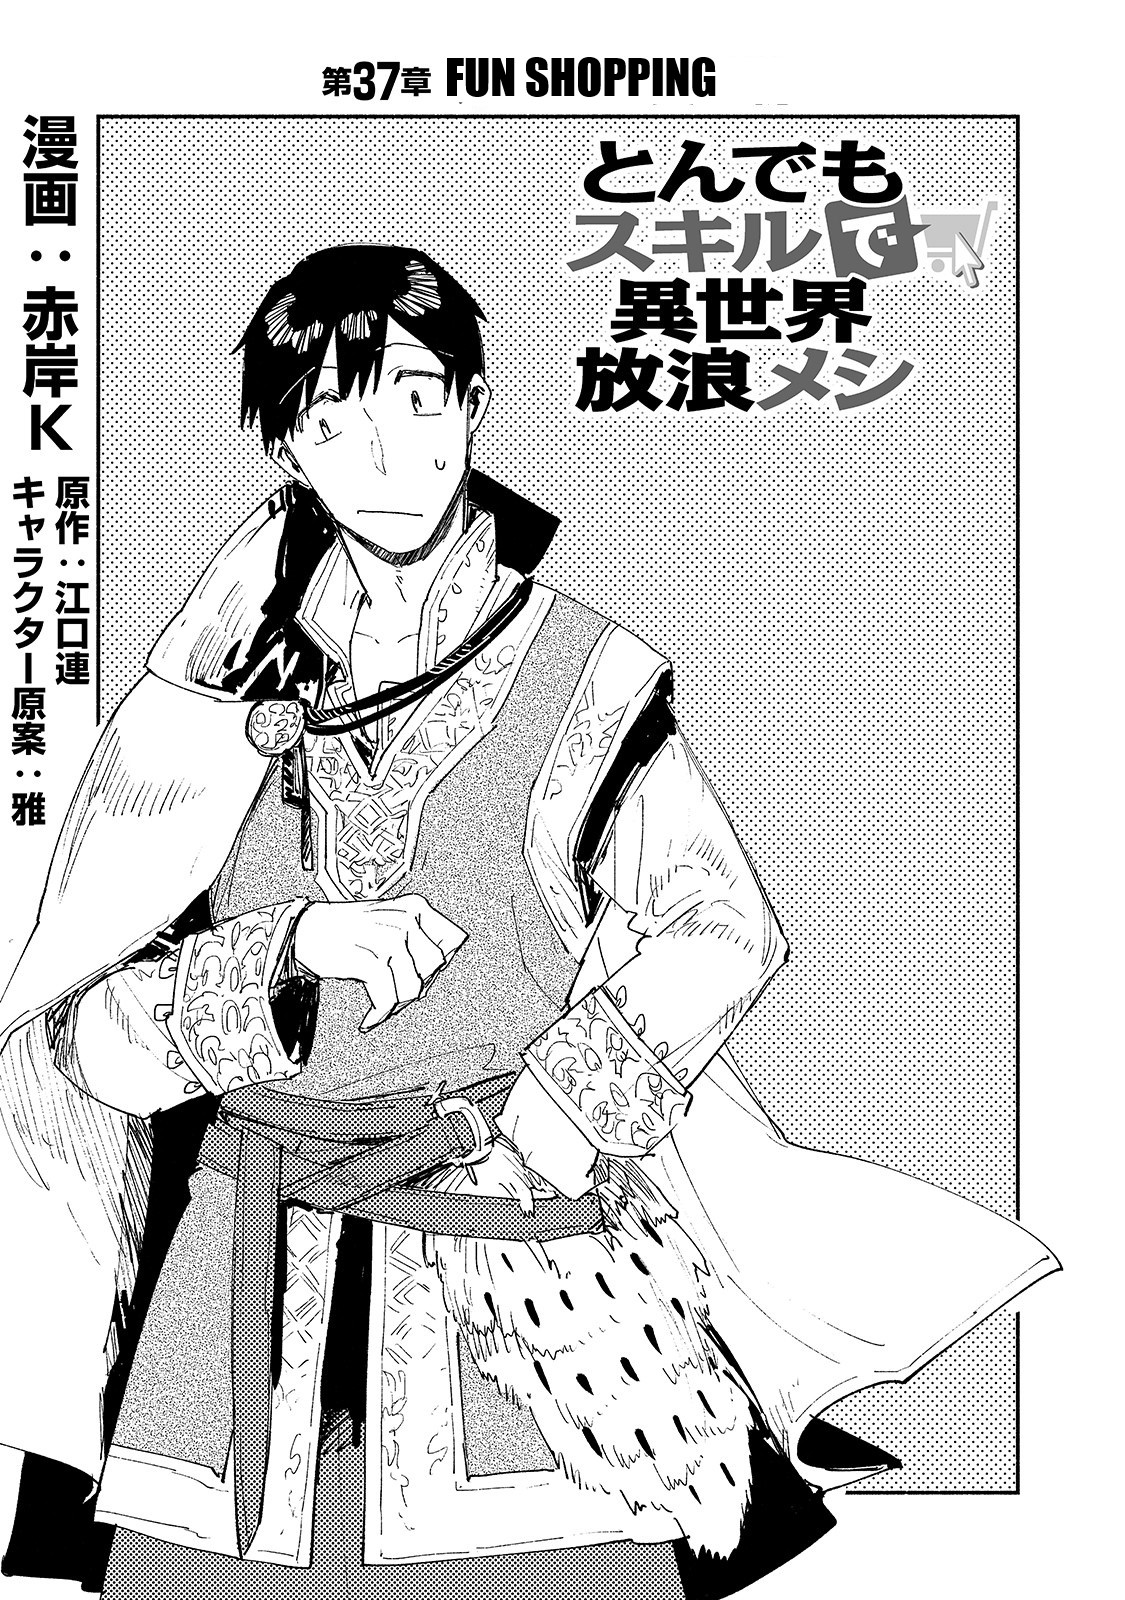 Read Tondemo Skill De Isekai Hourou Meshi: Sui No Daibouken Chapter 3:  Small Scatches And Sui S Special Potion on Mangakakalot